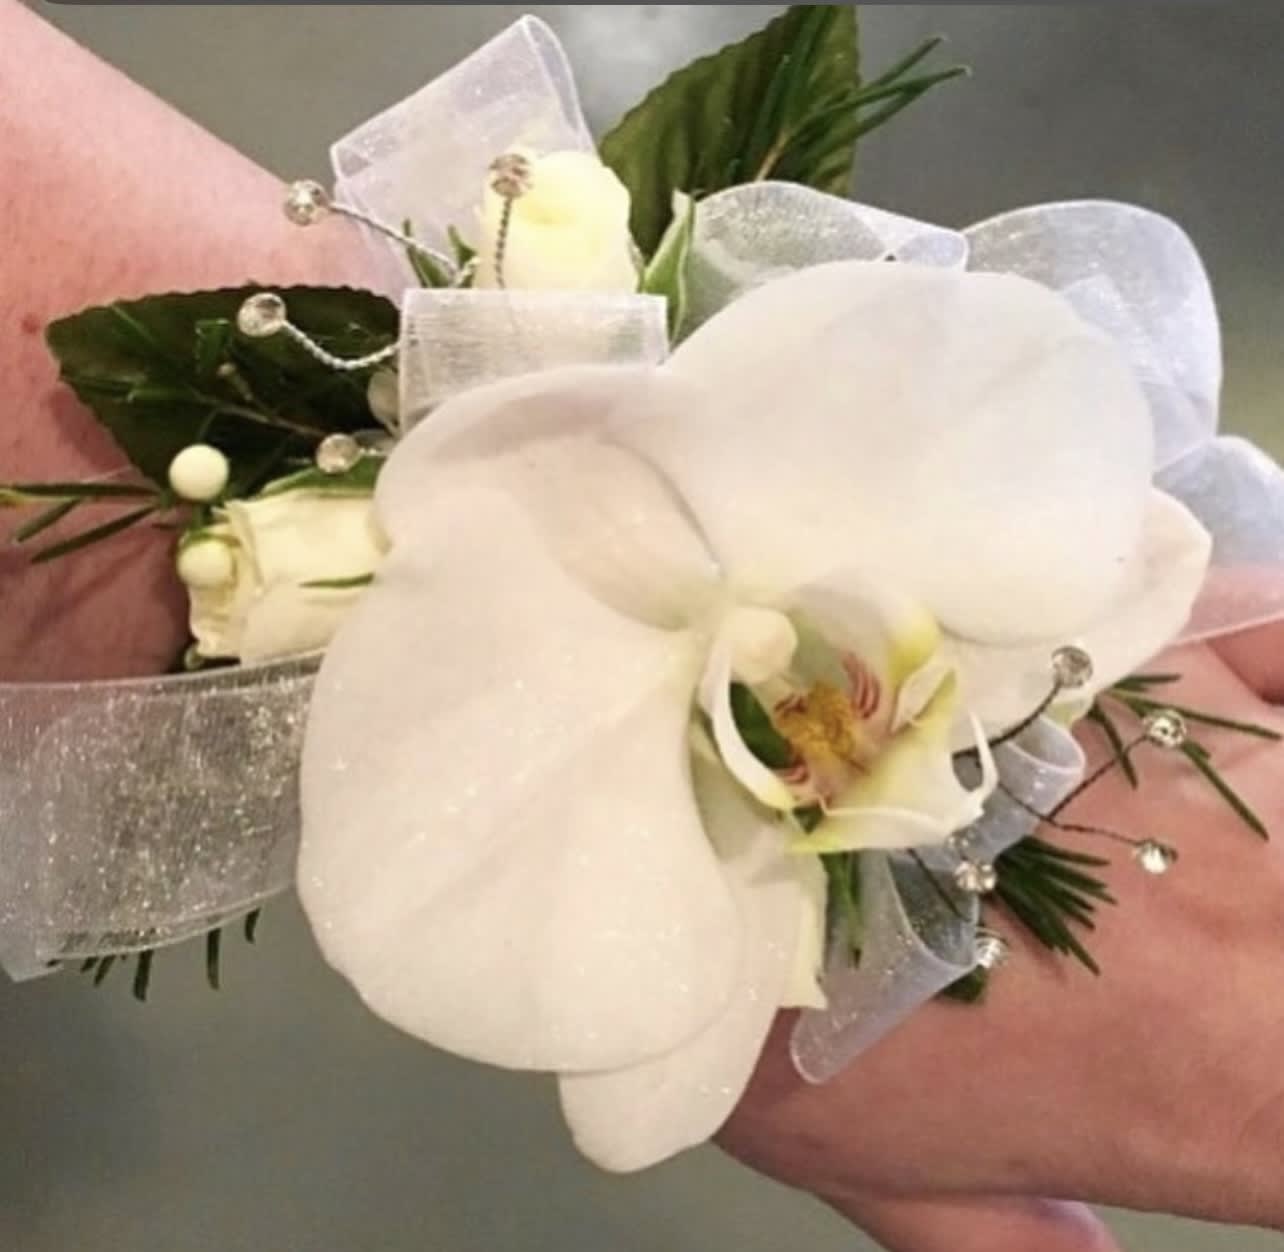 White Phalaenopsis Orchid and White Sweet Heart Roses Corsage with White Ribbon  - Beautiful white sweet heart roses and a white phalaenopsis orchid with delicate greenery, white filler and white ribbon. Please note that greenery and filler may be different depending on time of year and product available. Ribbon may also be different but will be white. Bling is additional please call to add.